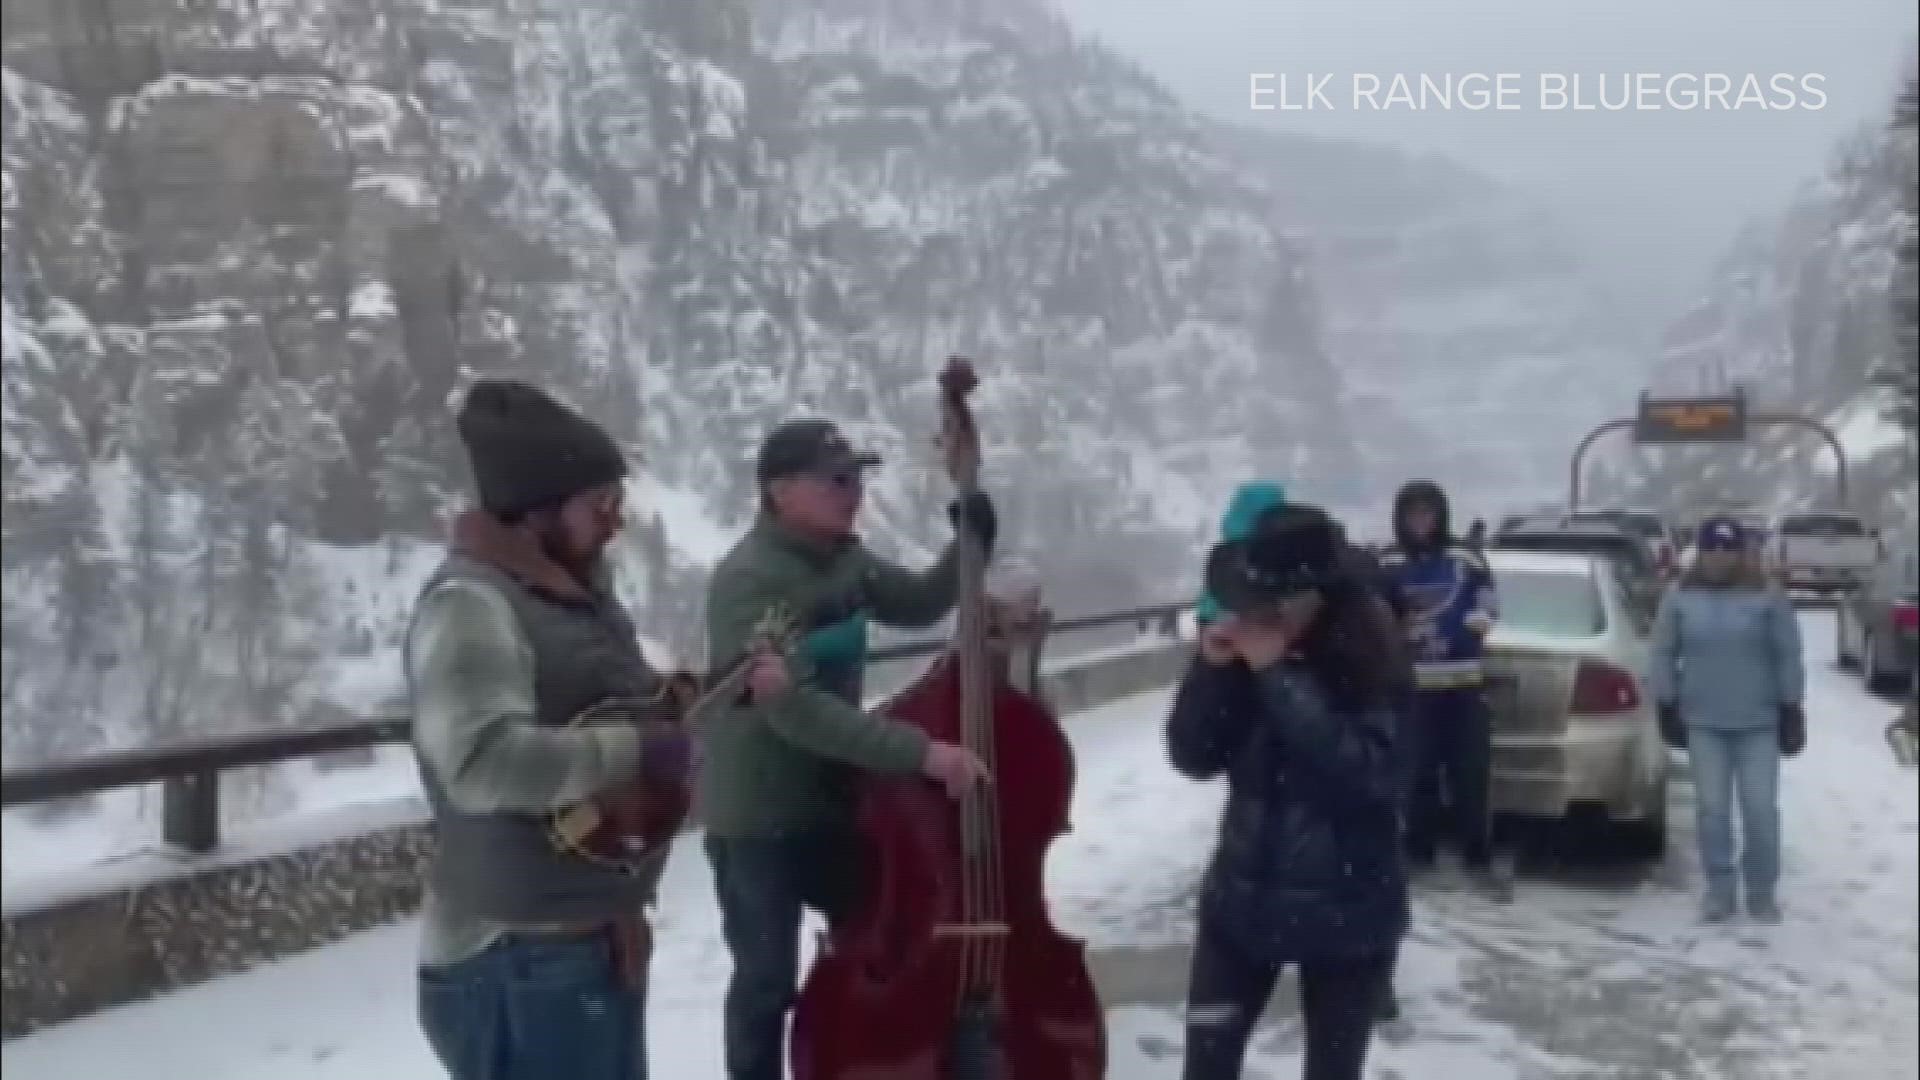 Our viewer Betty sent us this video of her band "Elk Range" getting out of the car and playing some music for the folks stuck on I-70.